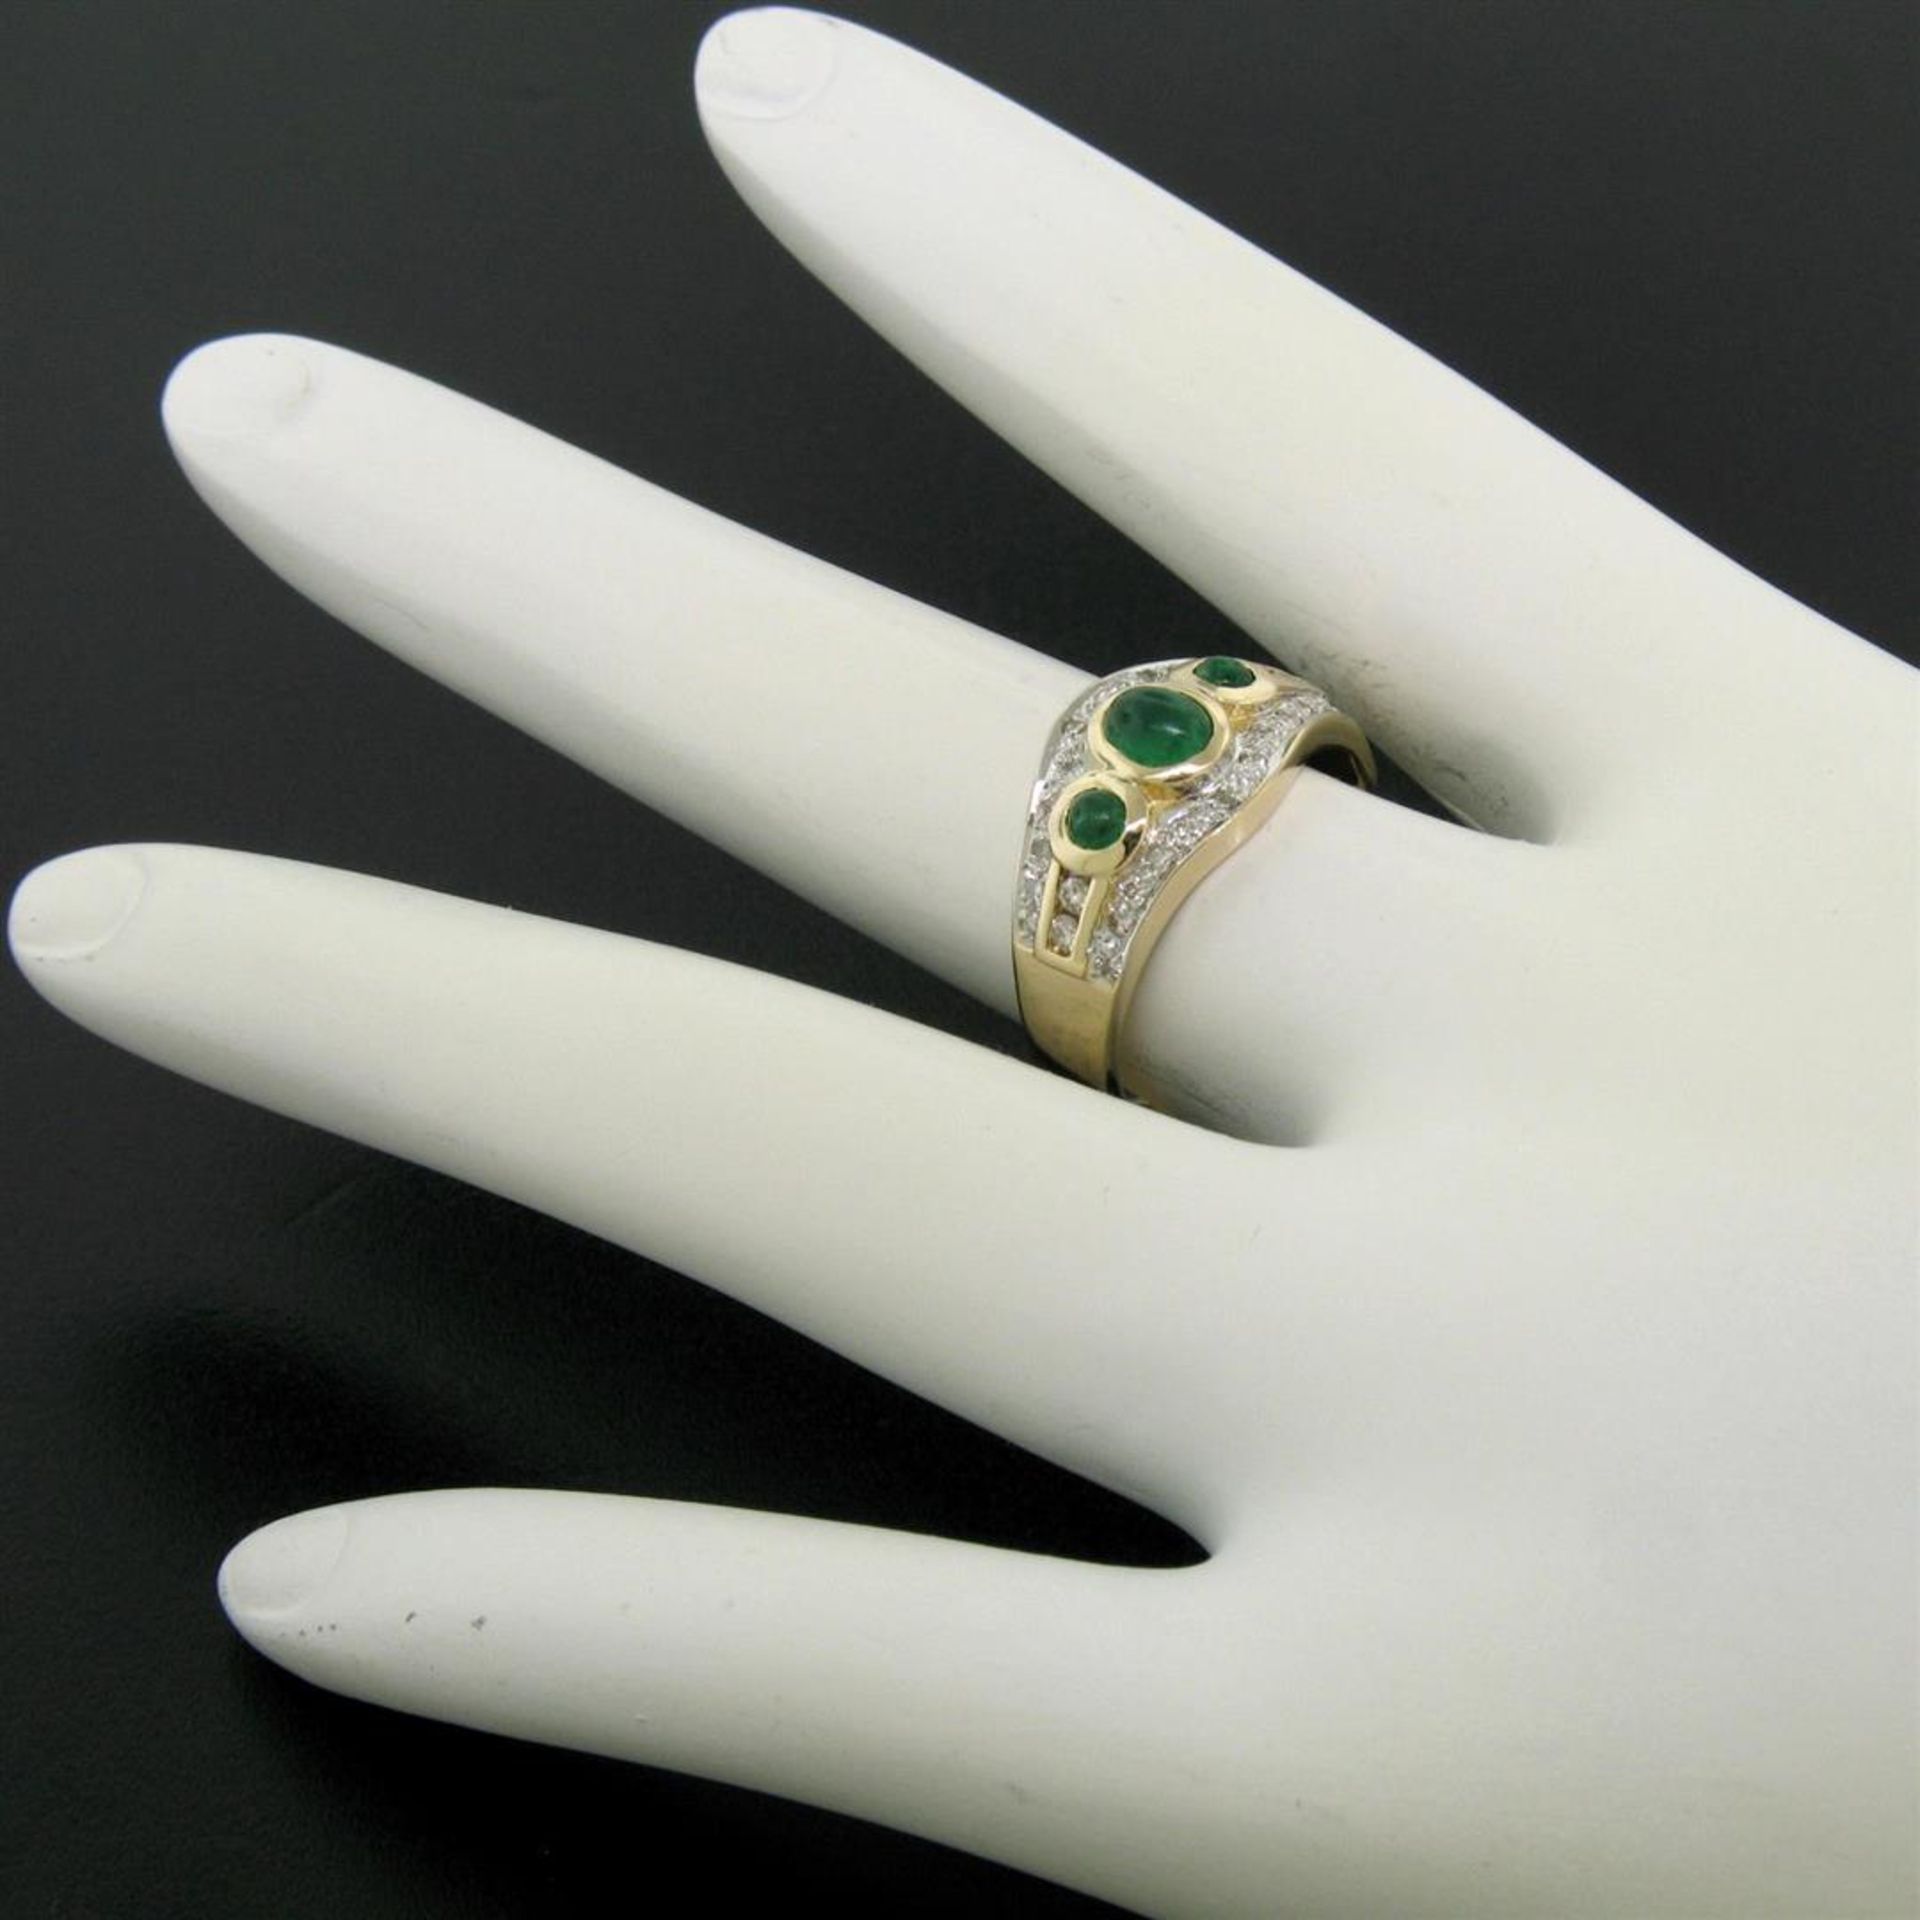 Petite 14K TT Gold 0.68 ctw 3 Cabochon Emerald & Diamond Accented Cocktail Ring - Image 7 of 9